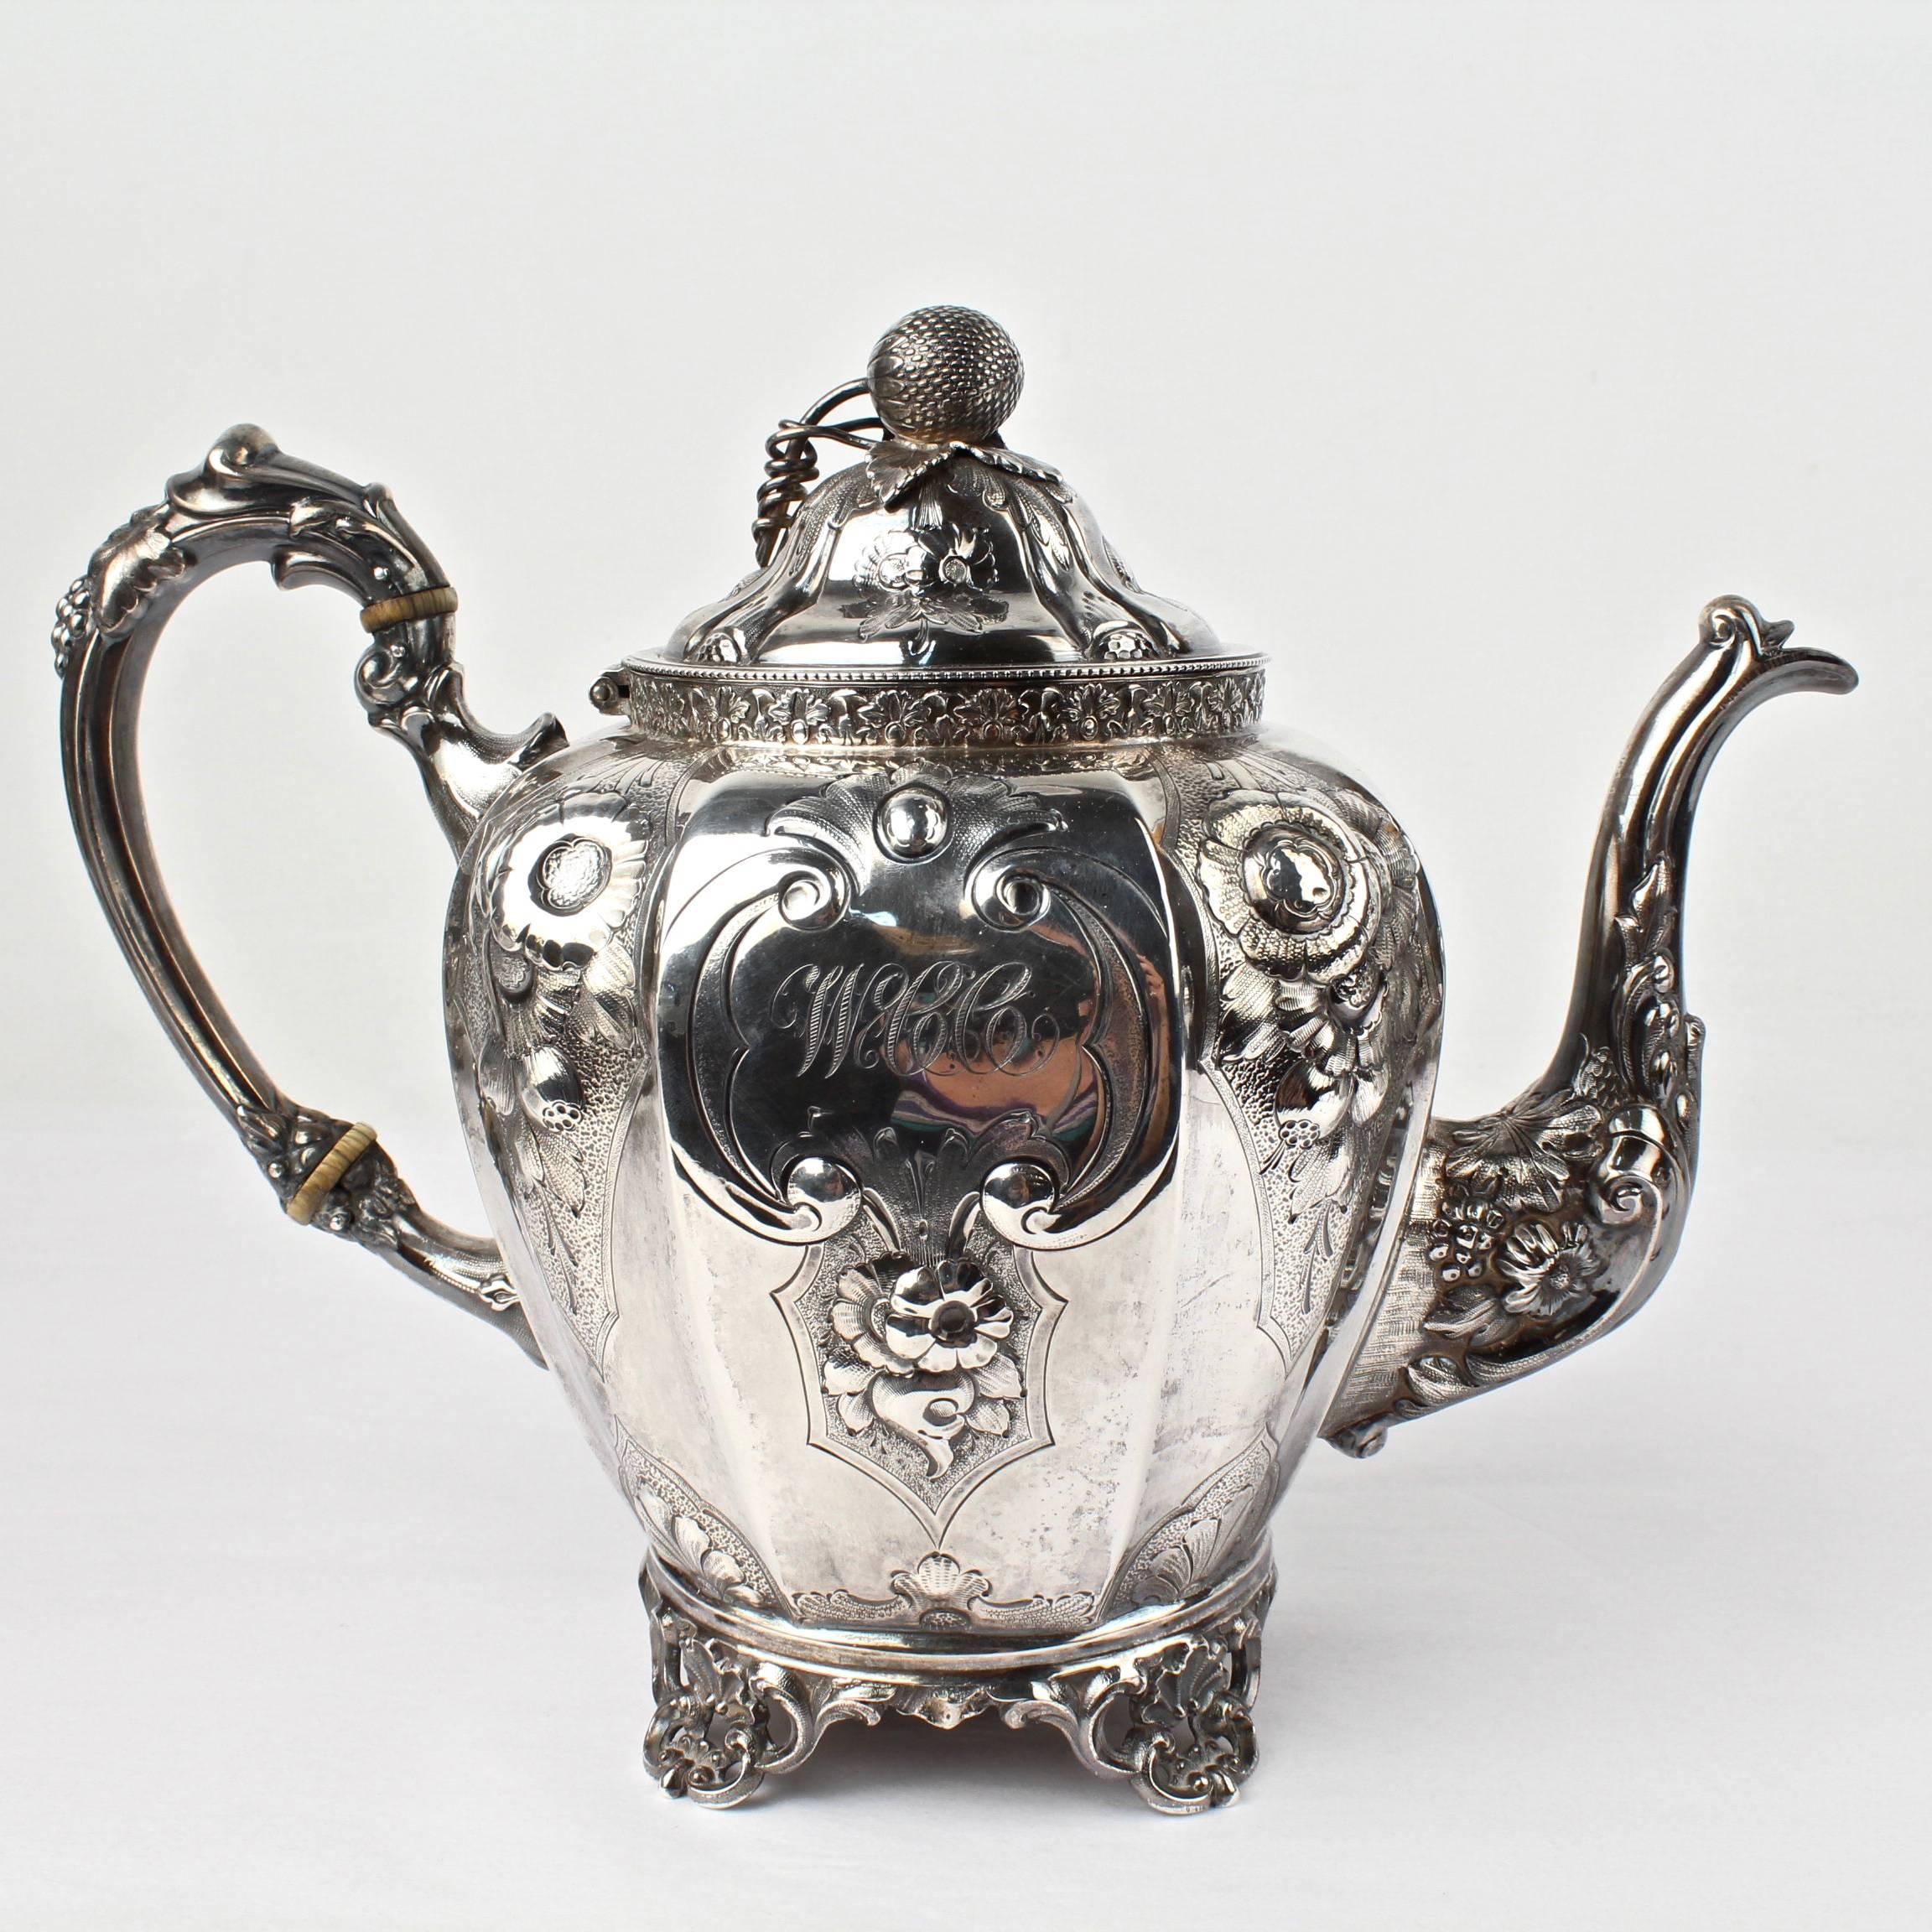 A large, four-piece, 19th century American coin silver tea set by the renowned New York silversmiths, Wood & Hughes. A stately and impressive set.

Finely worked with repousse decoration throughout. The central cartouches each bear an early